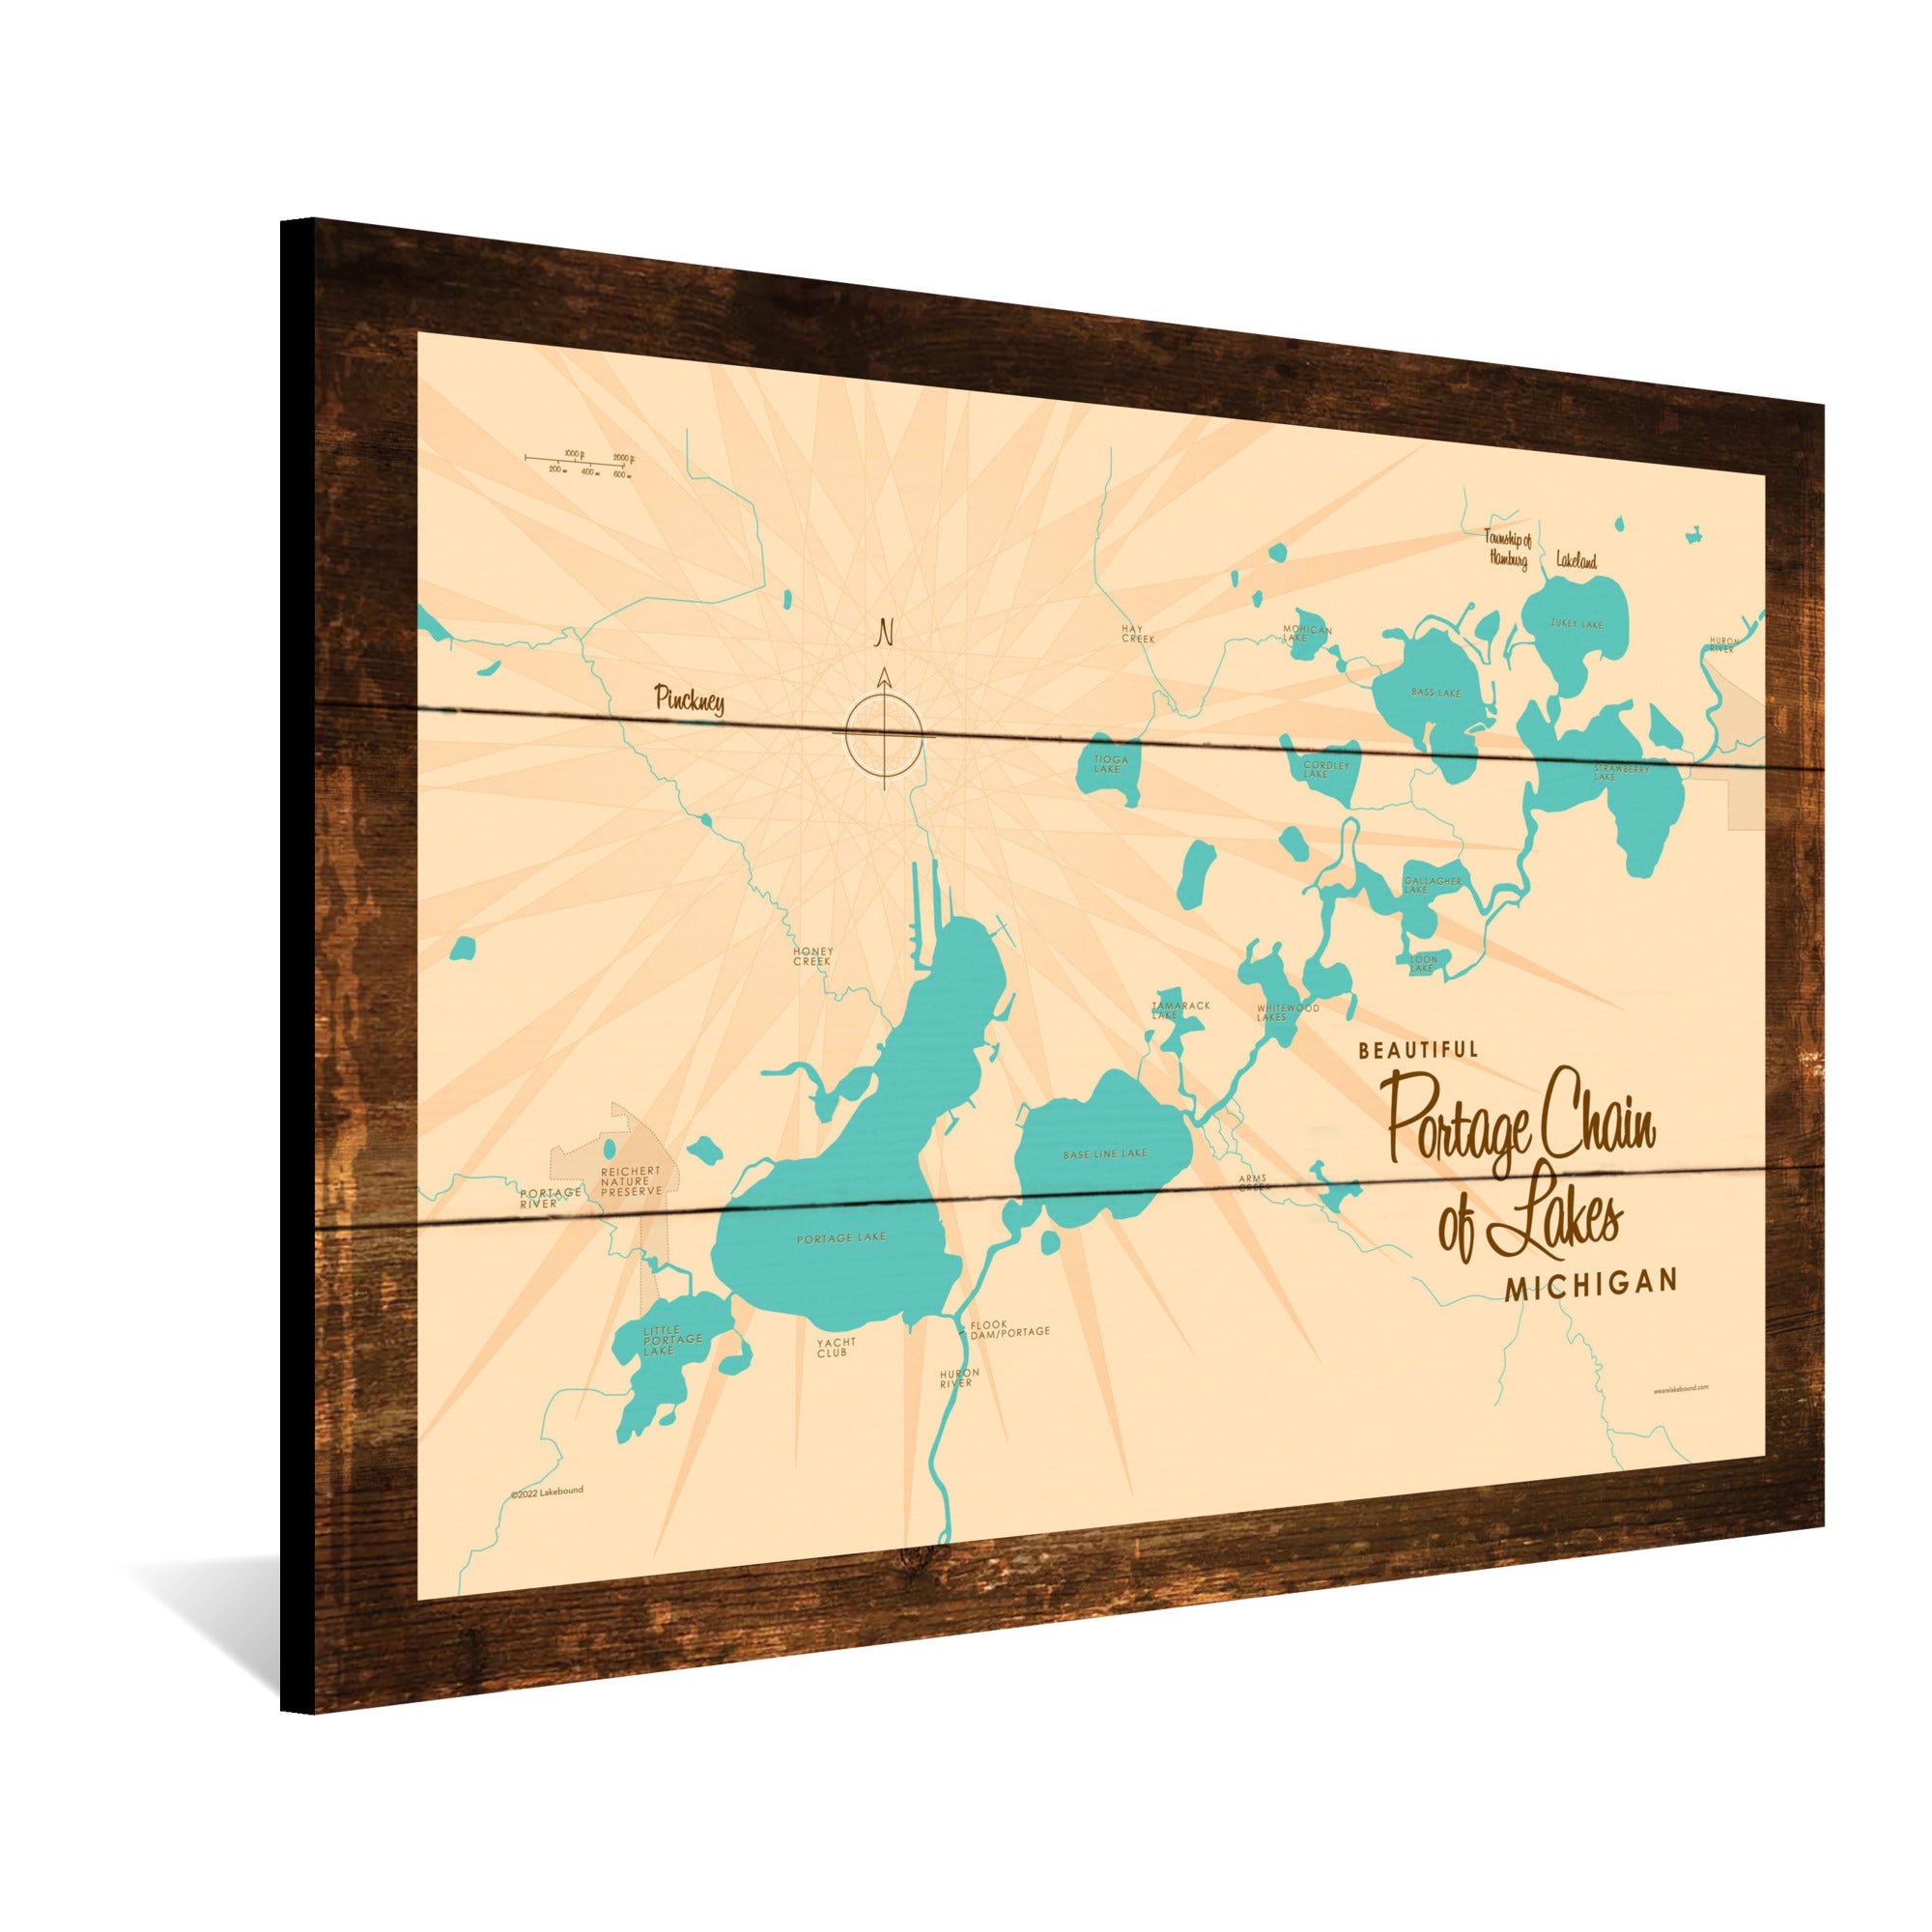 Portage Chain of Lakes Michigan, Rustic Wood Sign Map Art